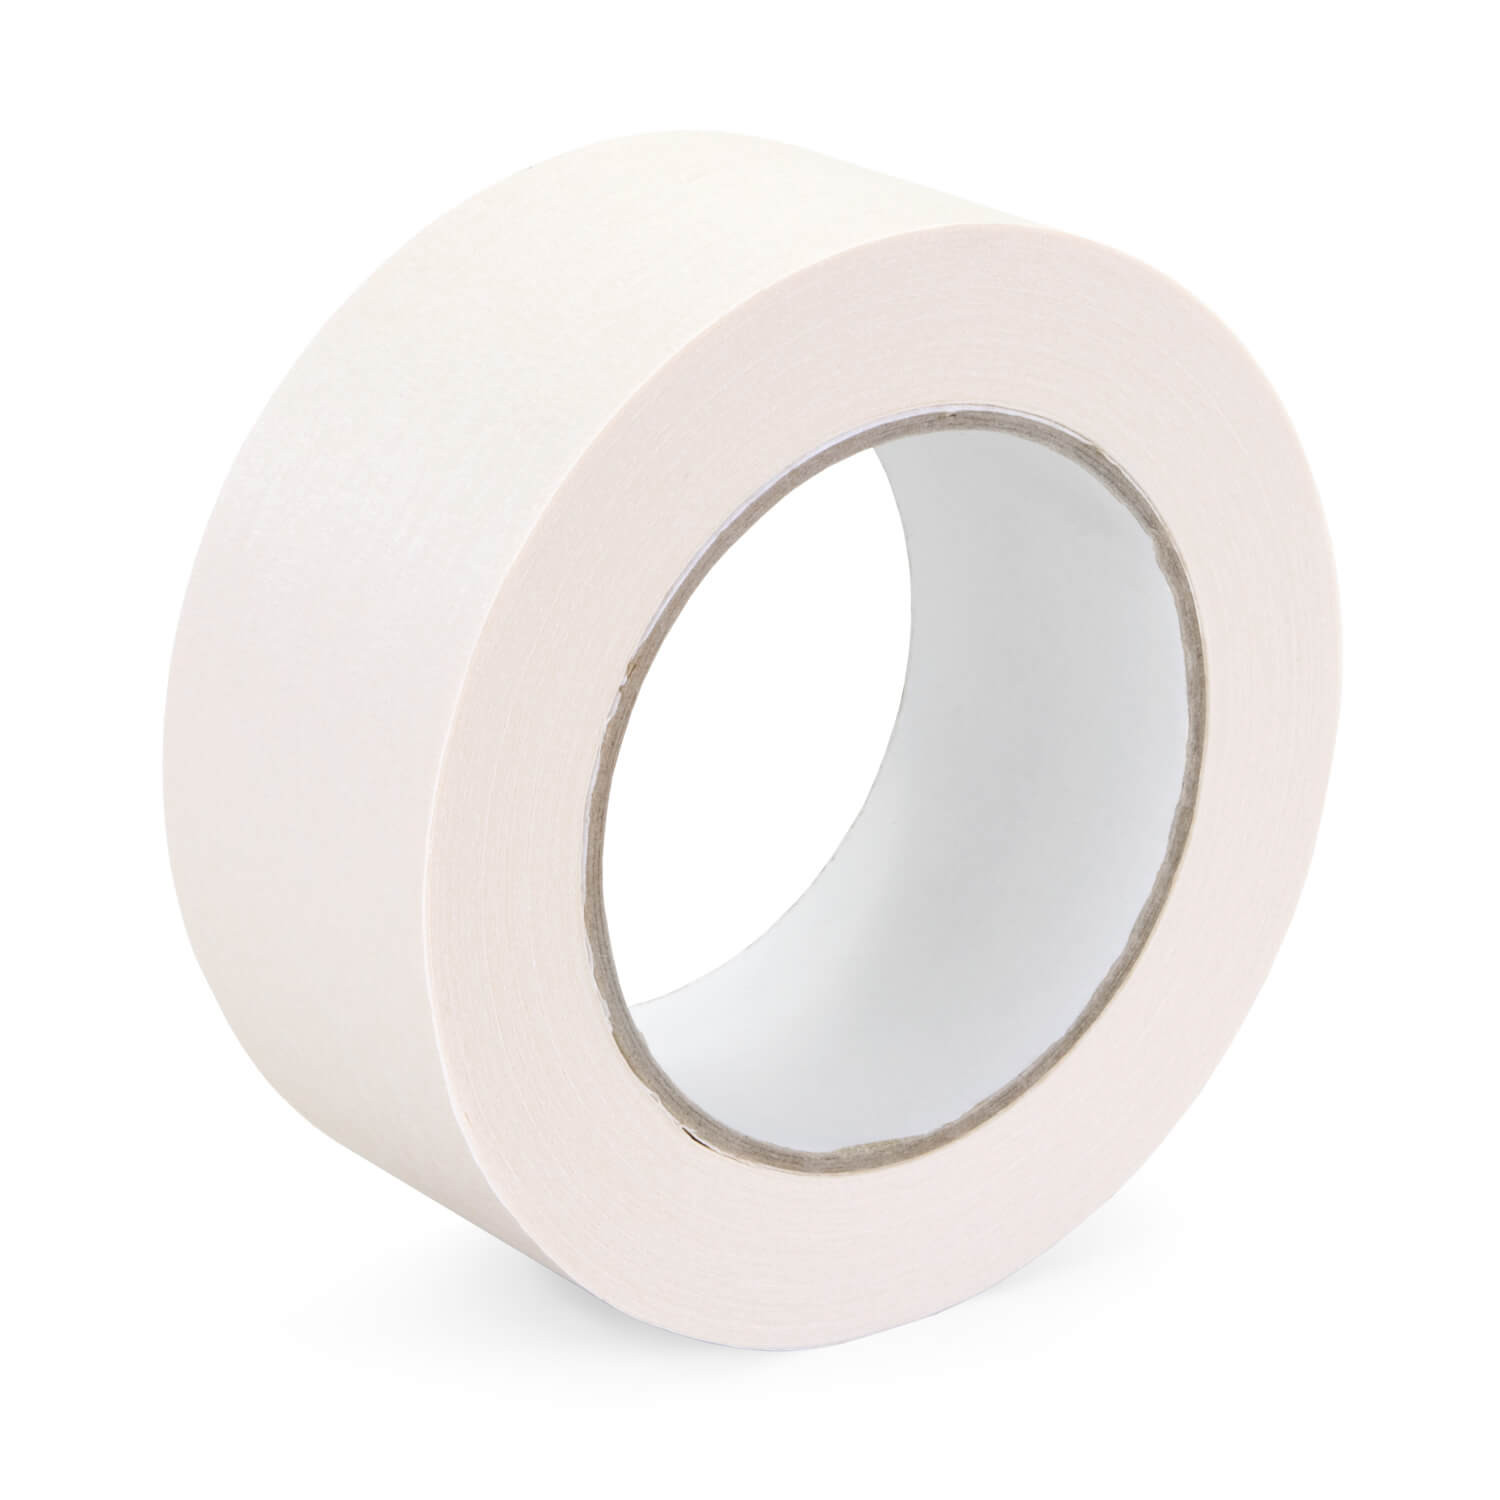 Generic YOUKING White Masking Tape, Easy Tear Tape Best for